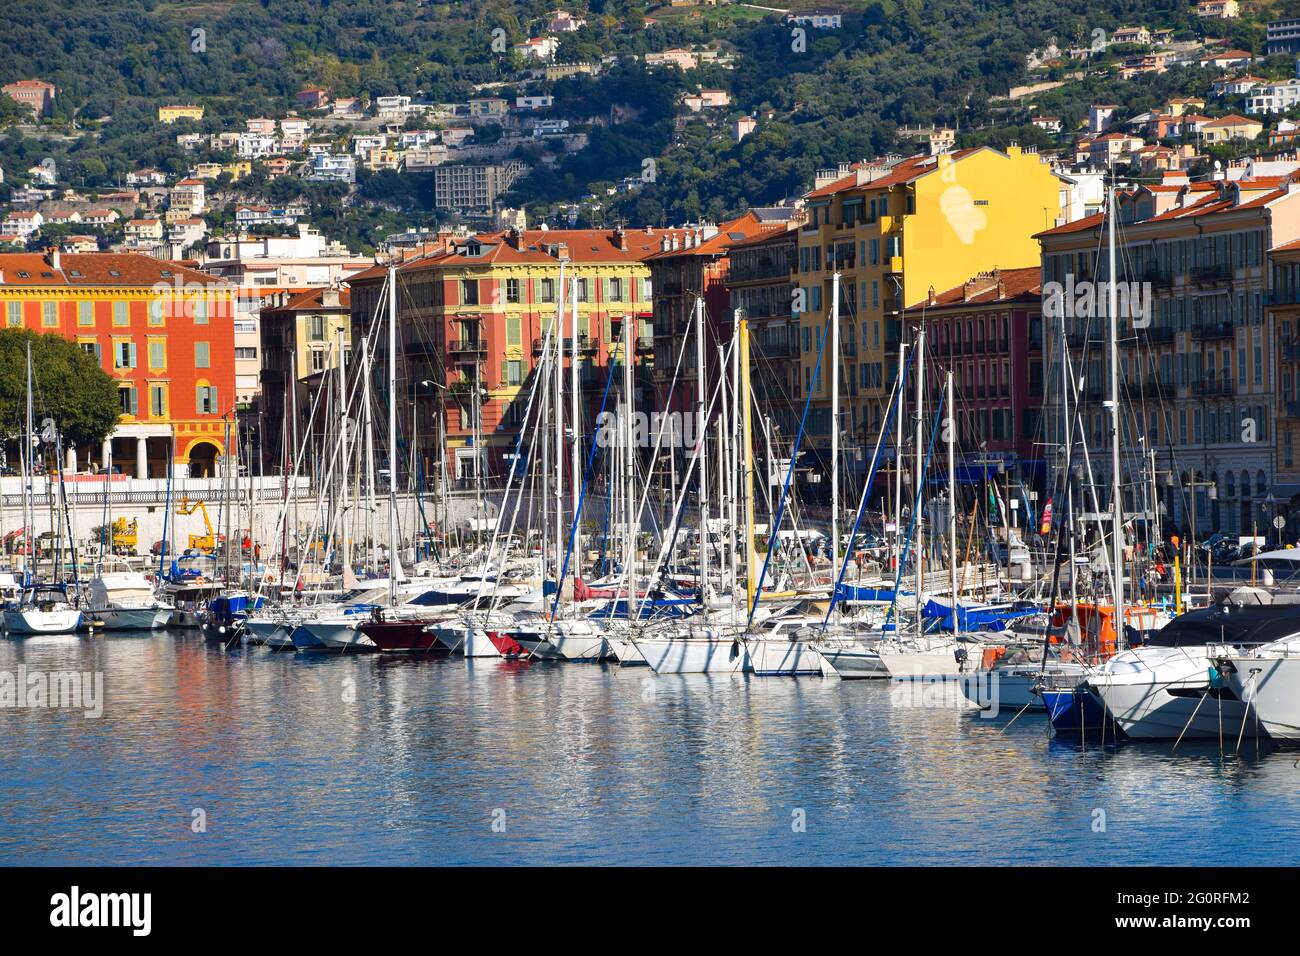 Port Lympia, Nice, South of France, 2019. Stock Photo